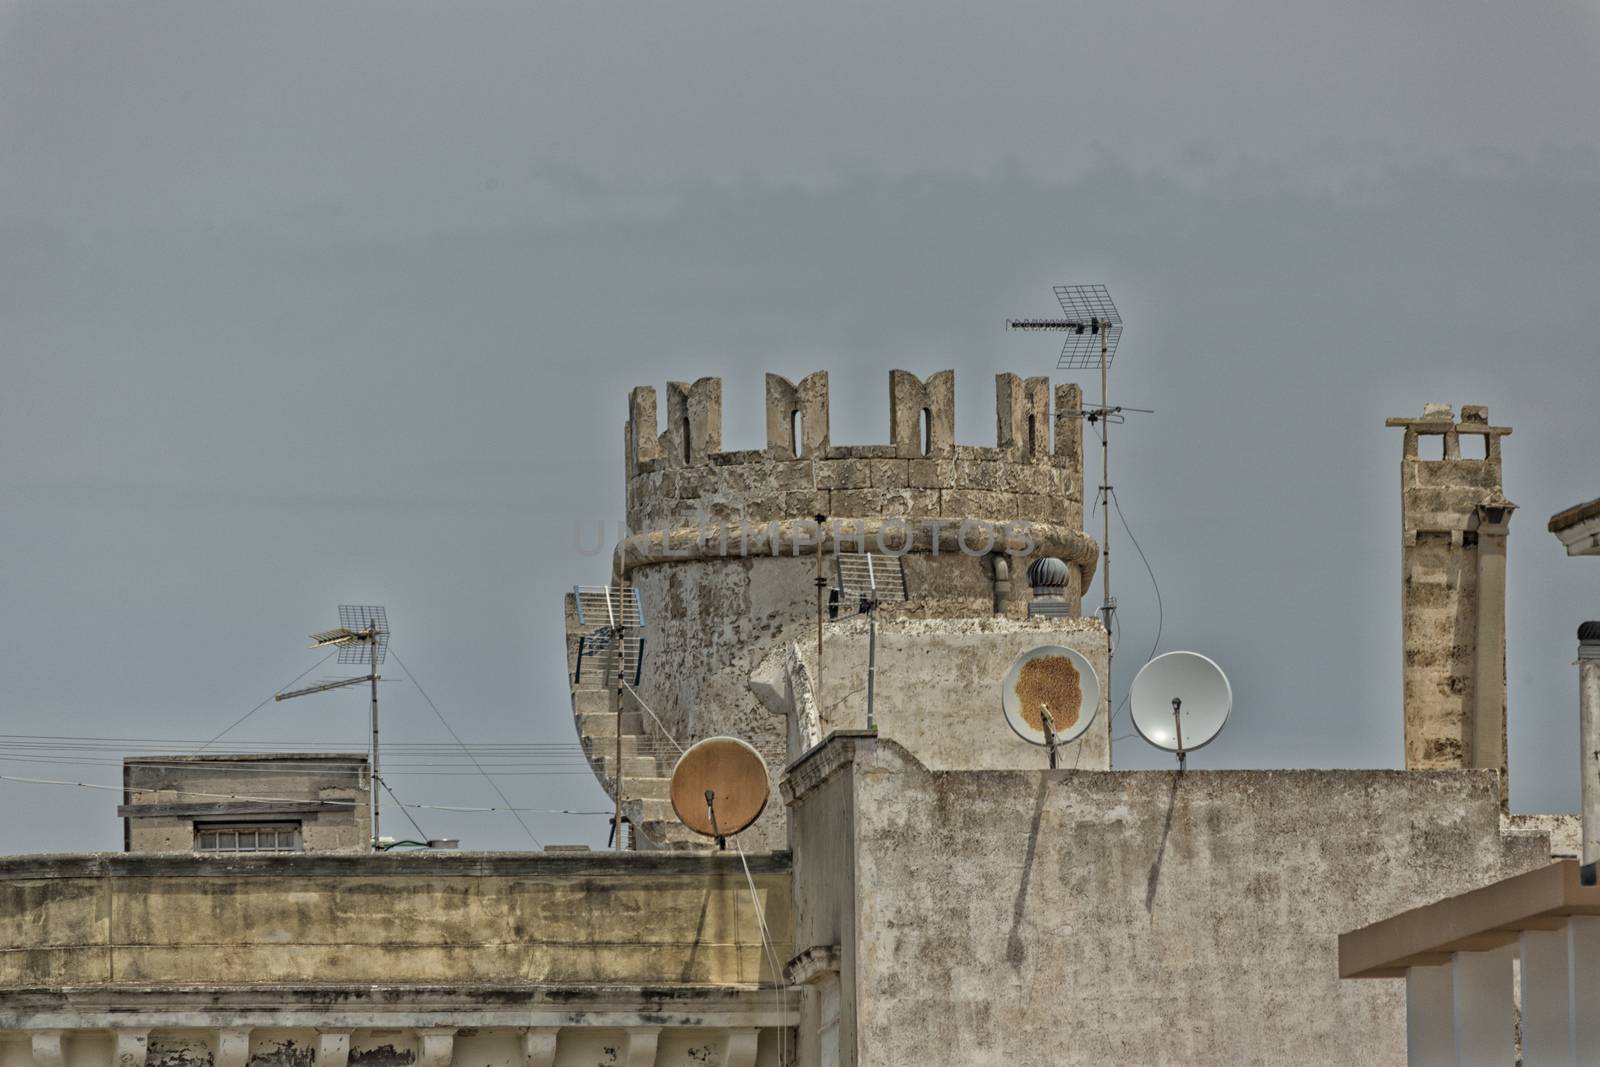 Tower and satellite dishes in the old town of Gallipoli (Le) in the southern of Italy